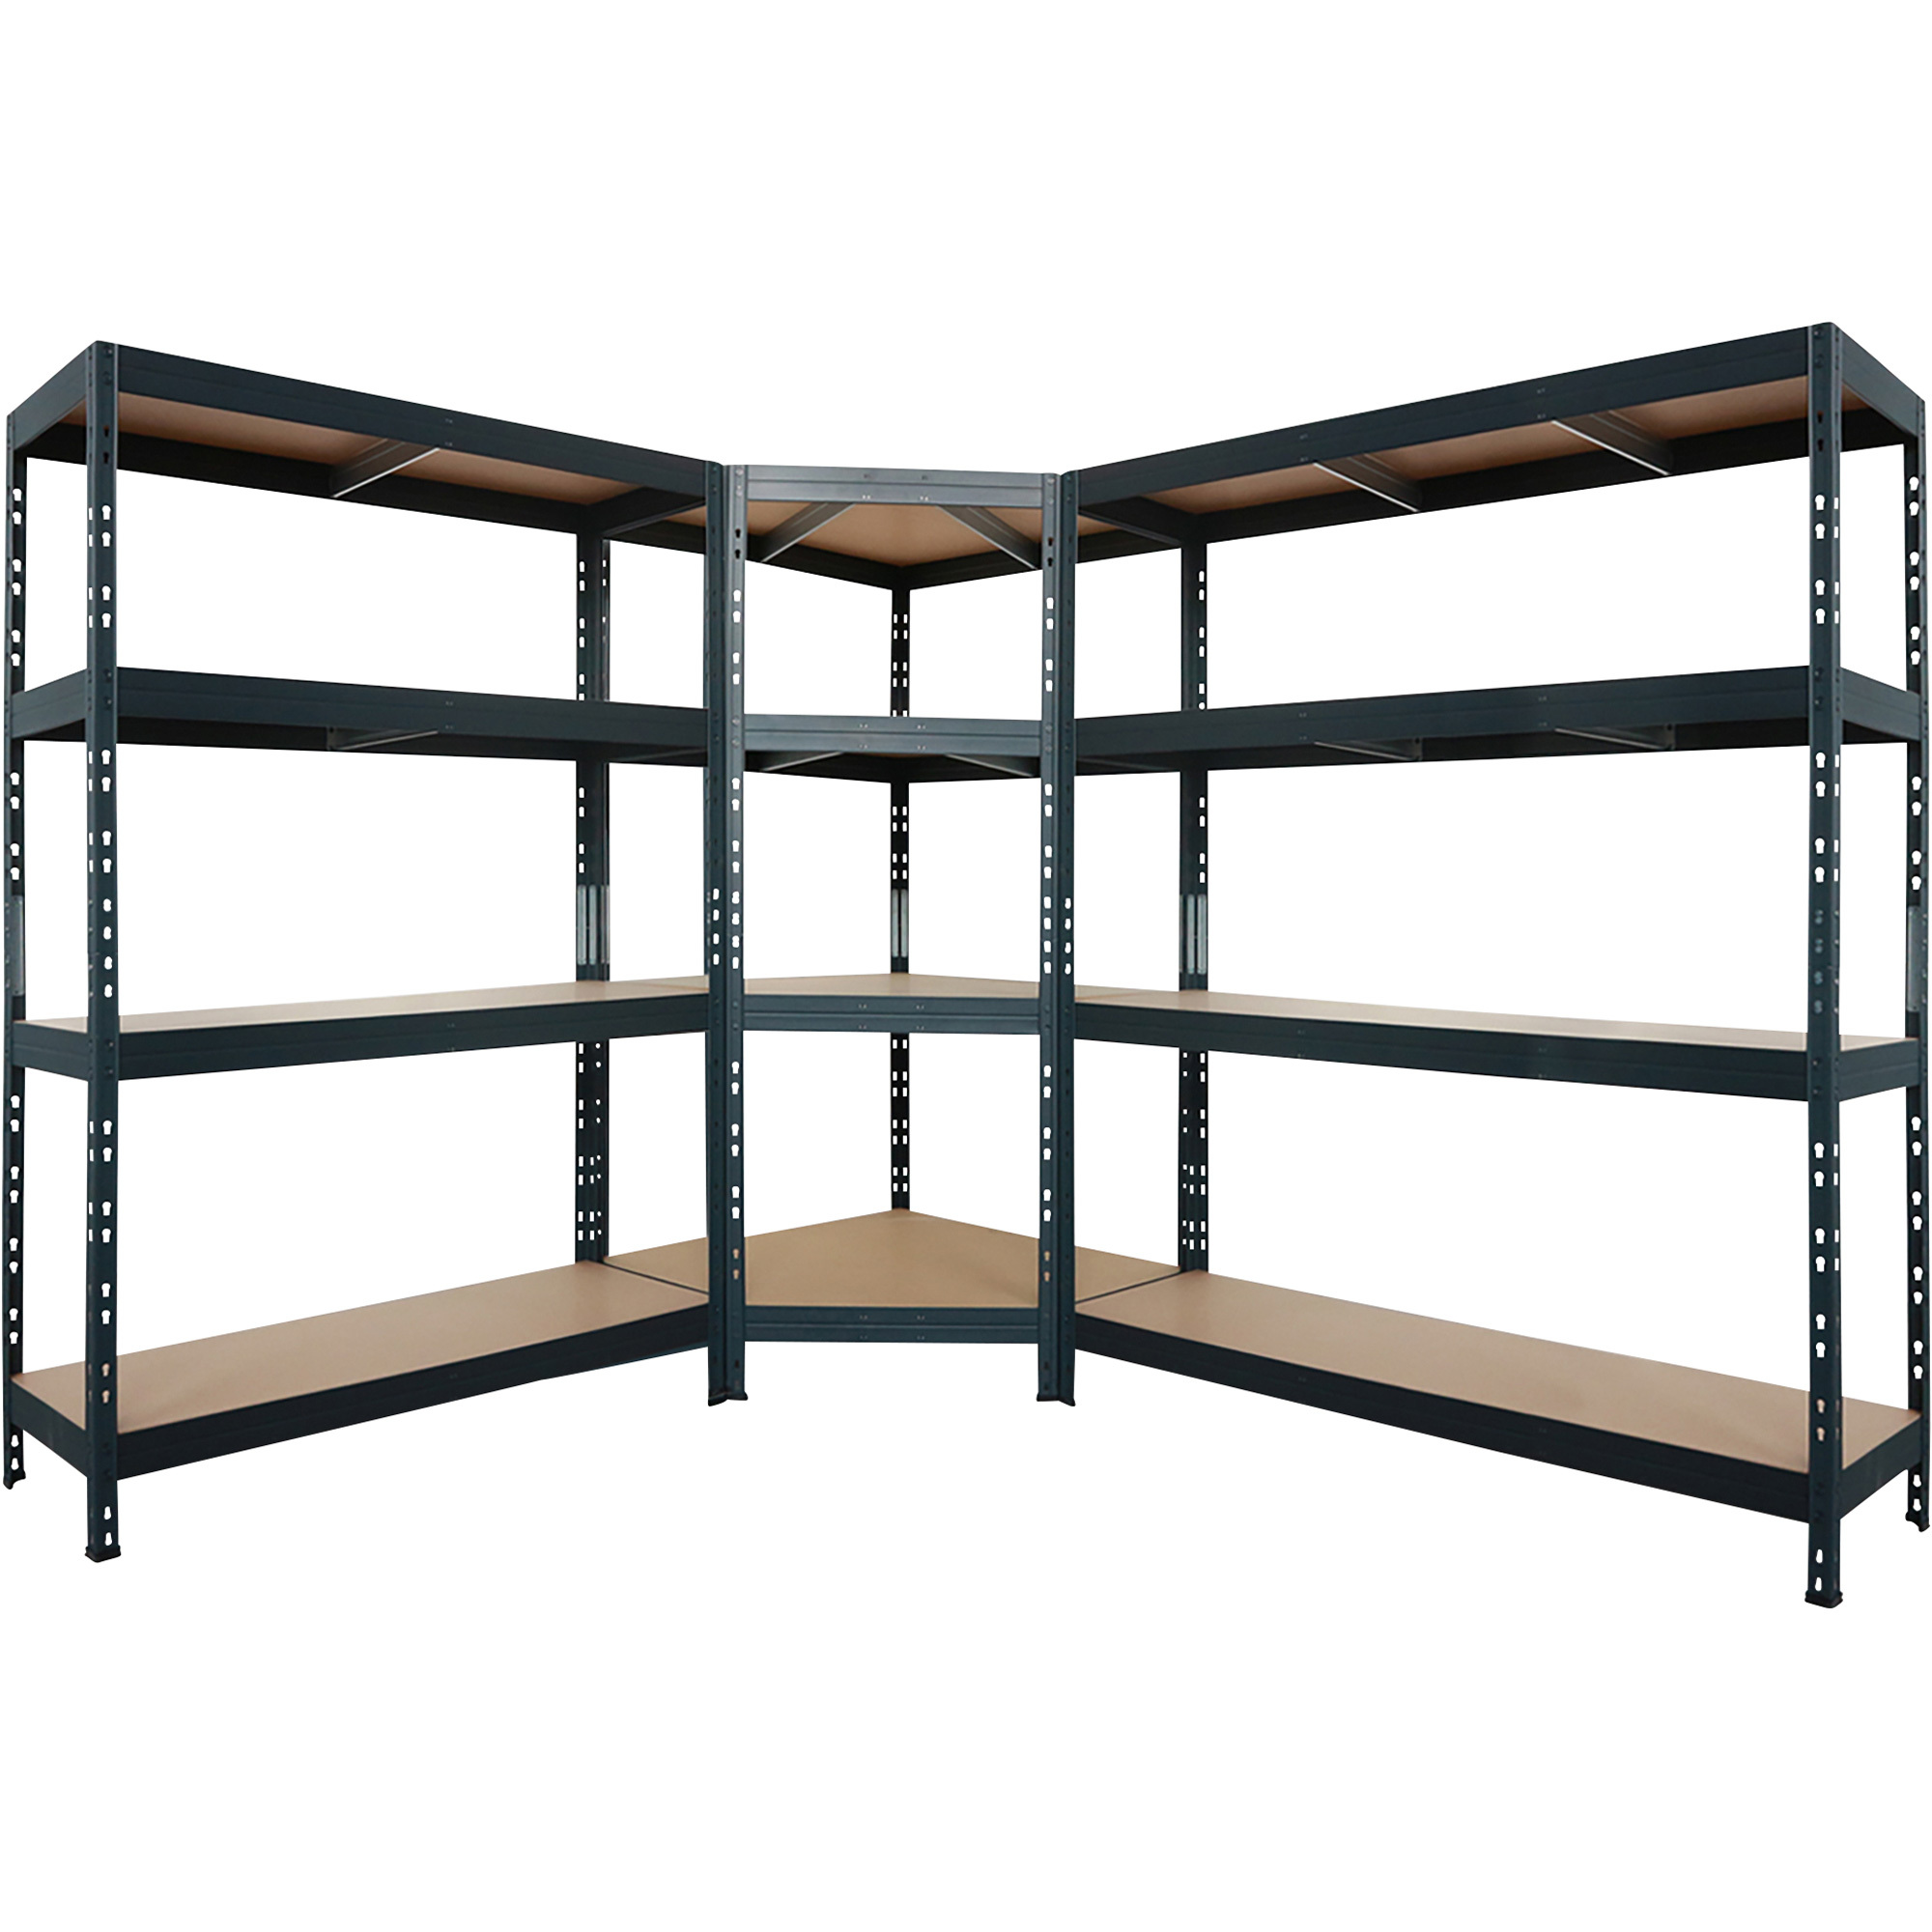 AR Shelving 2400-Lb. Capacity, 71Inch H x 36Inch W x 18Inch D Rivet Shelving Unit — Or Combine to Make 2 Benches, Ea. 35 1/2Inch H x 72Inch L x 18Inch -  GARAGE 36/18 600 LB